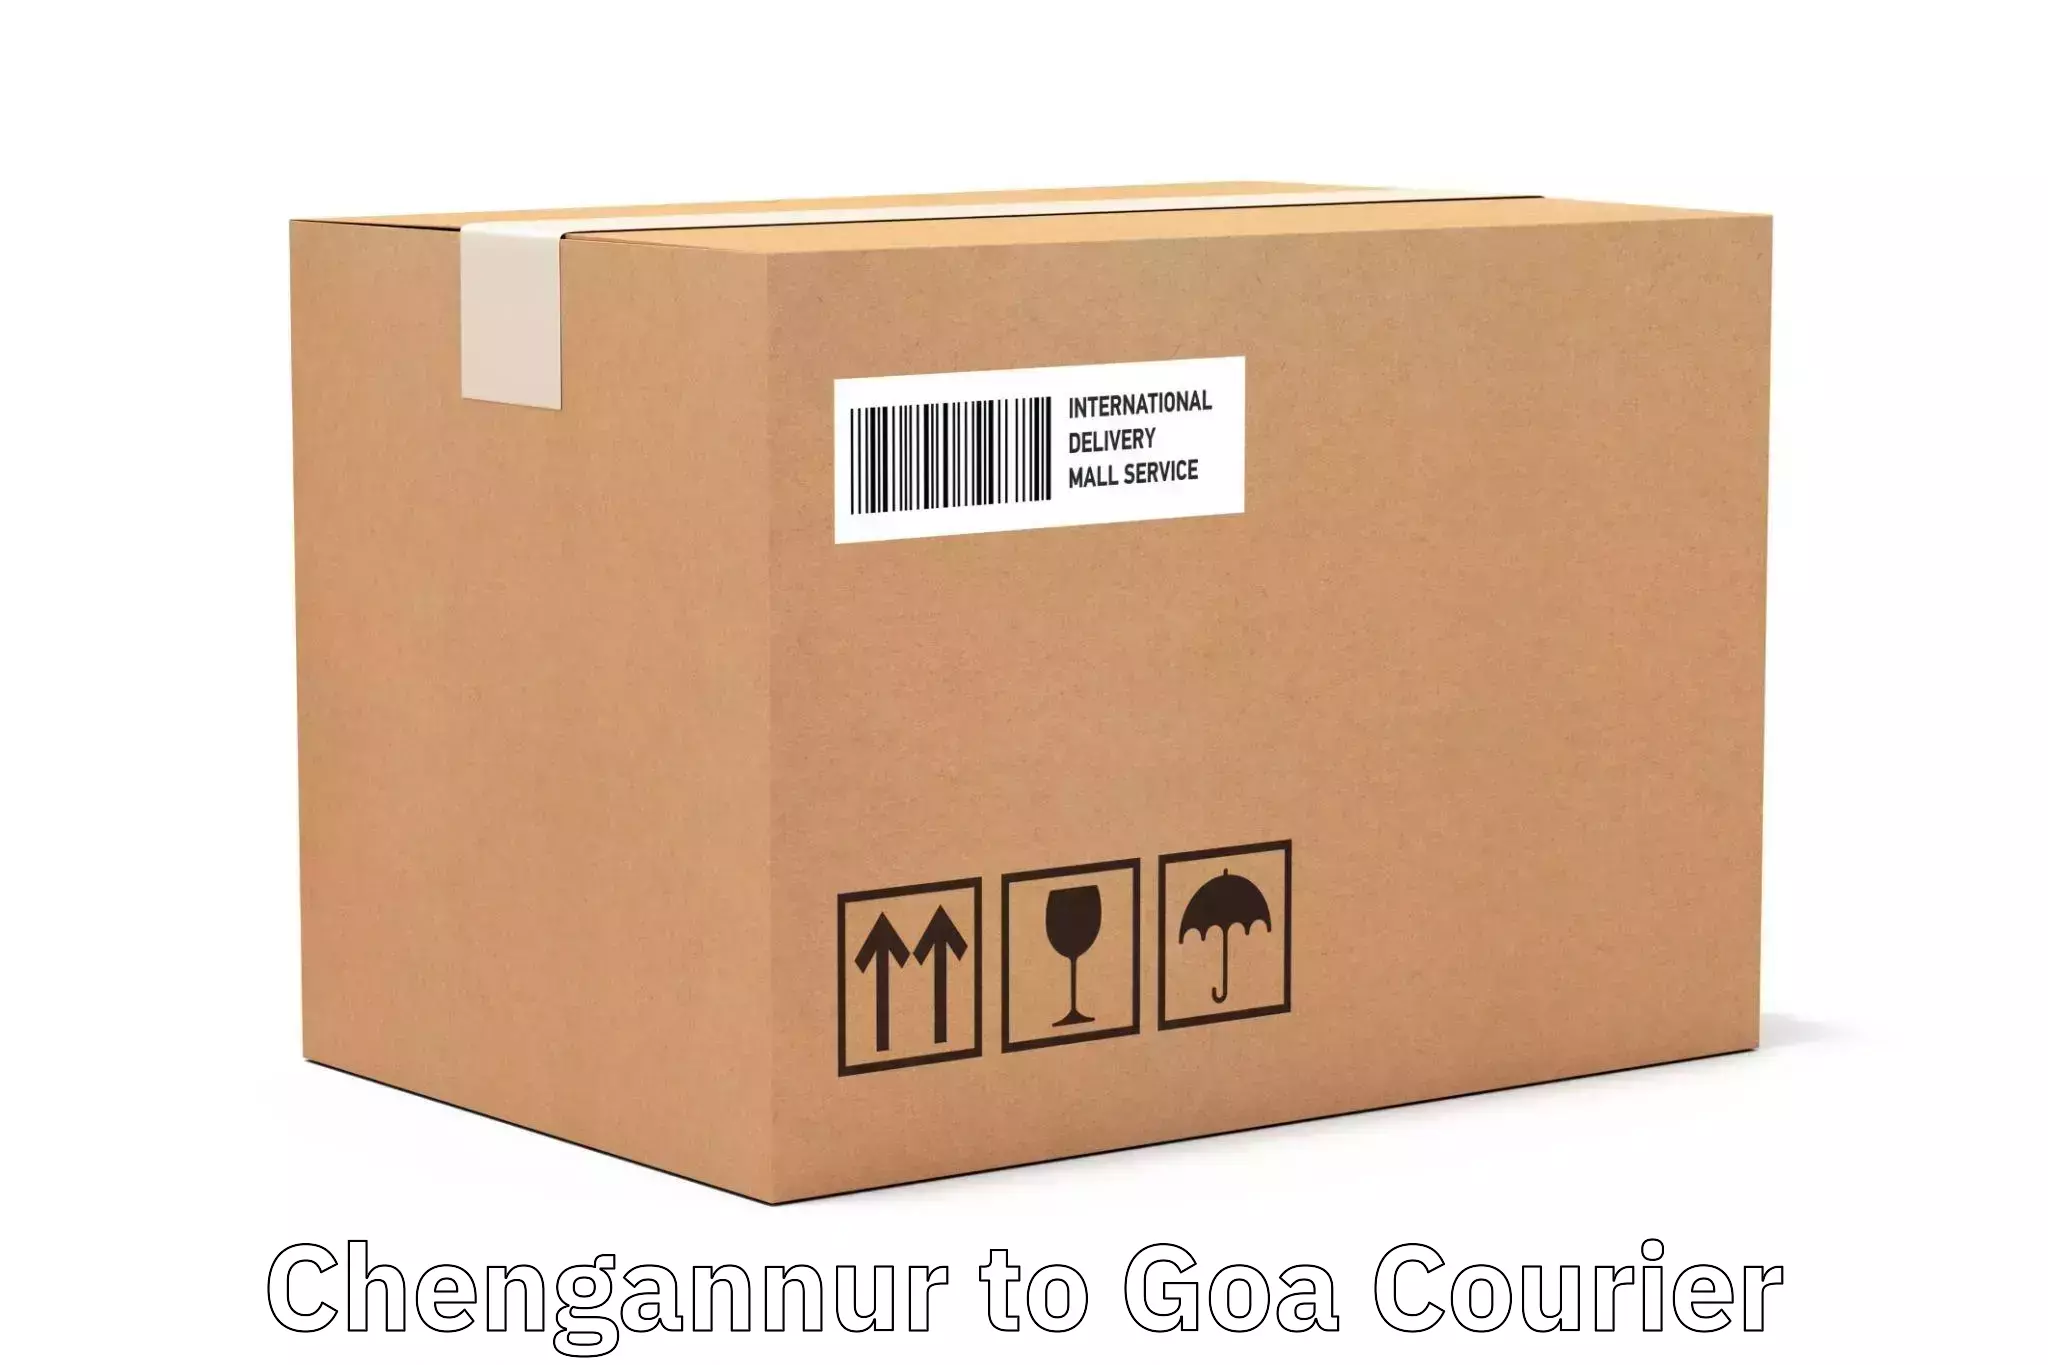 User-friendly delivery service Chengannur to Goa